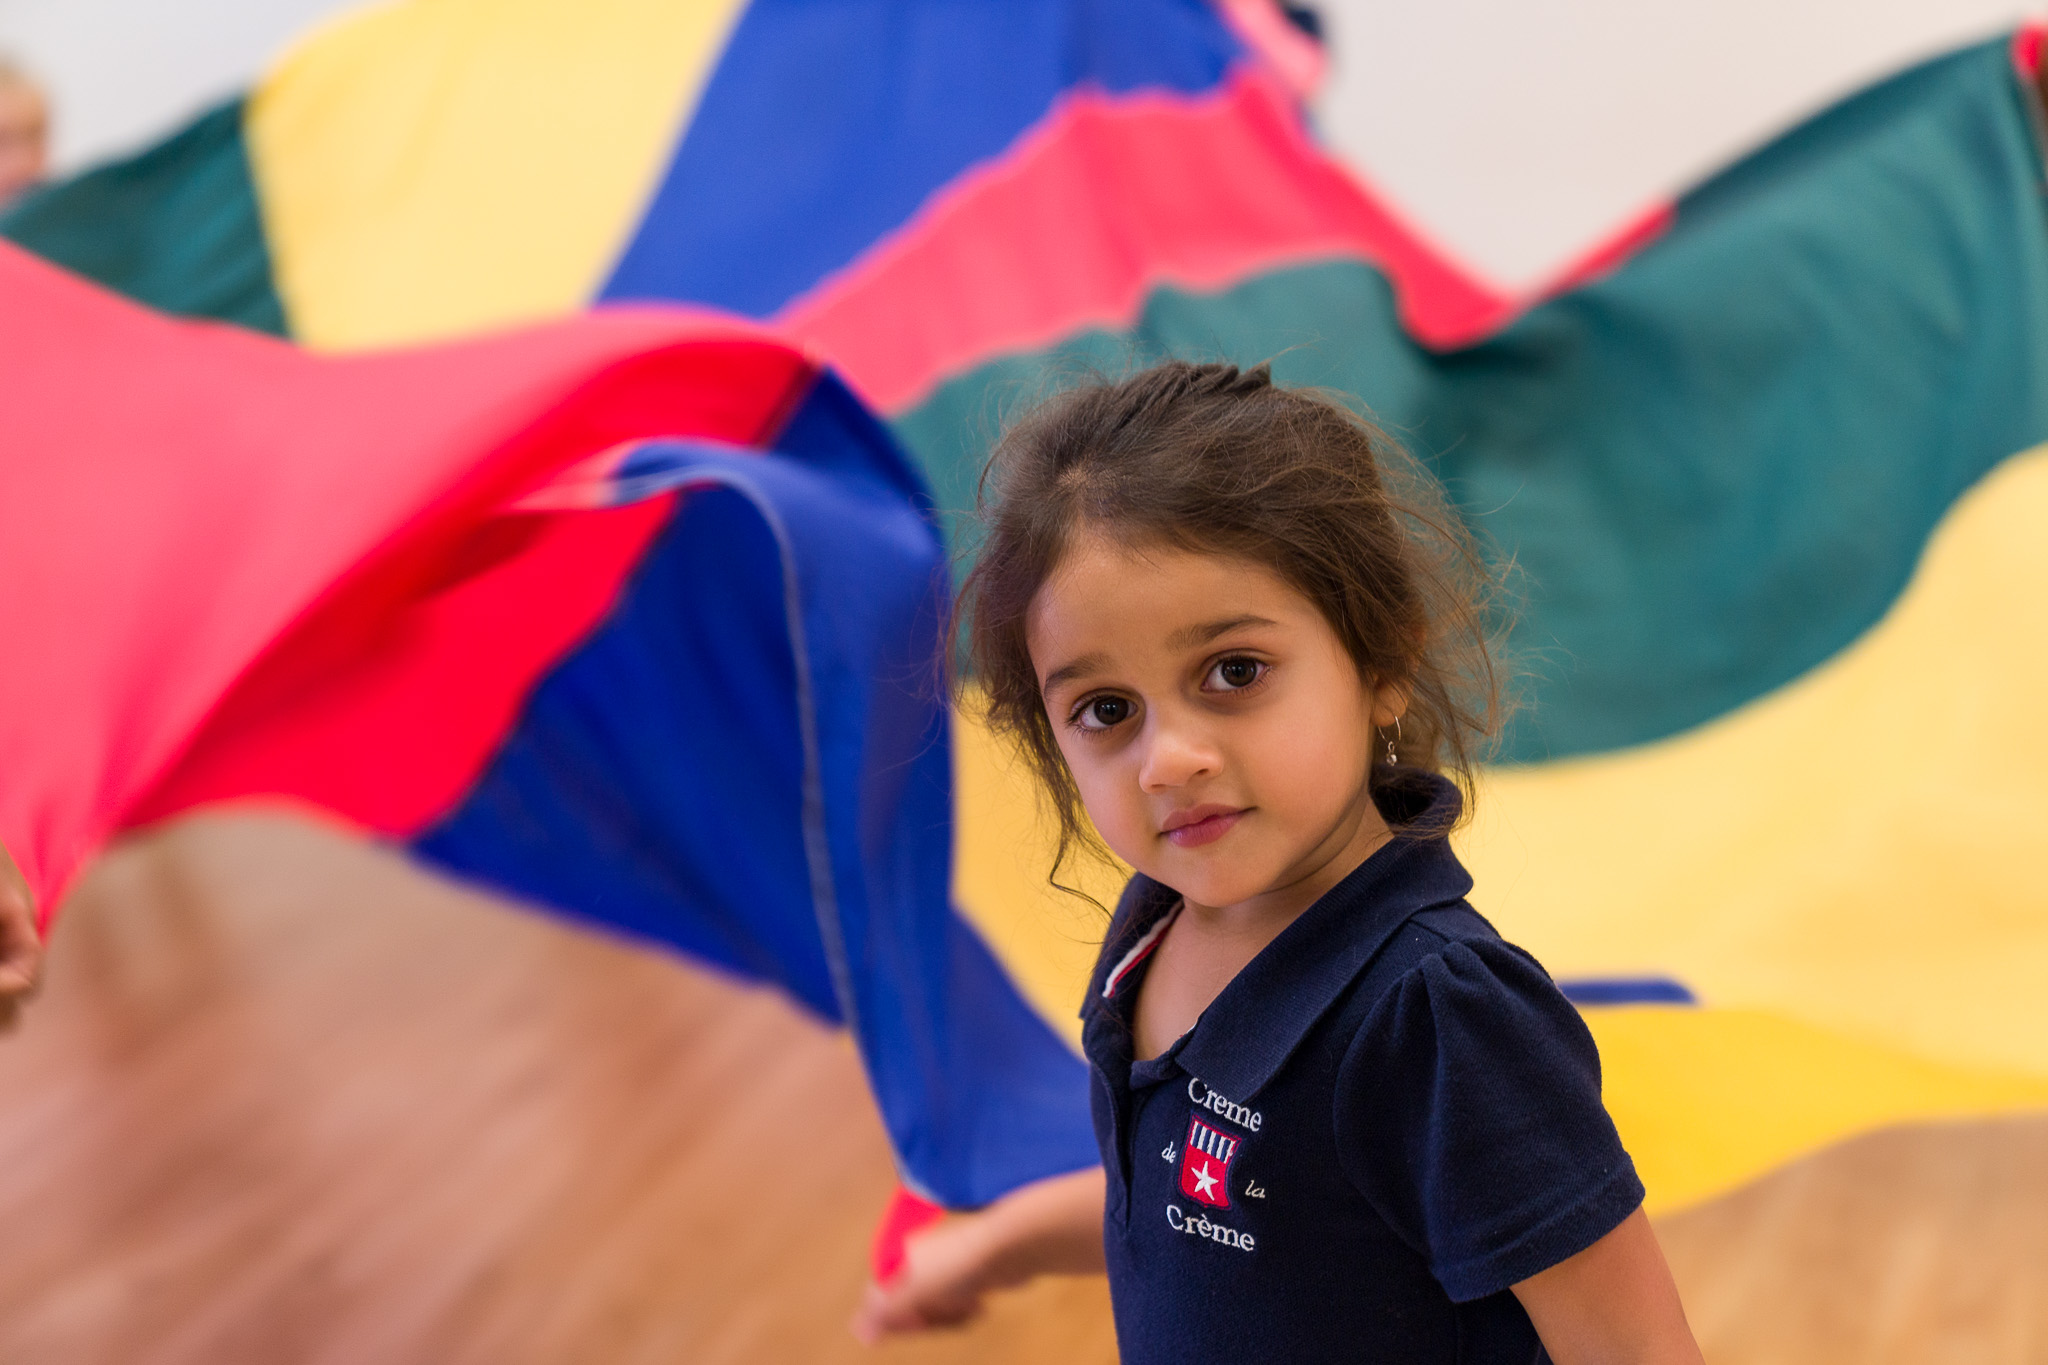 Student playing with a parachute